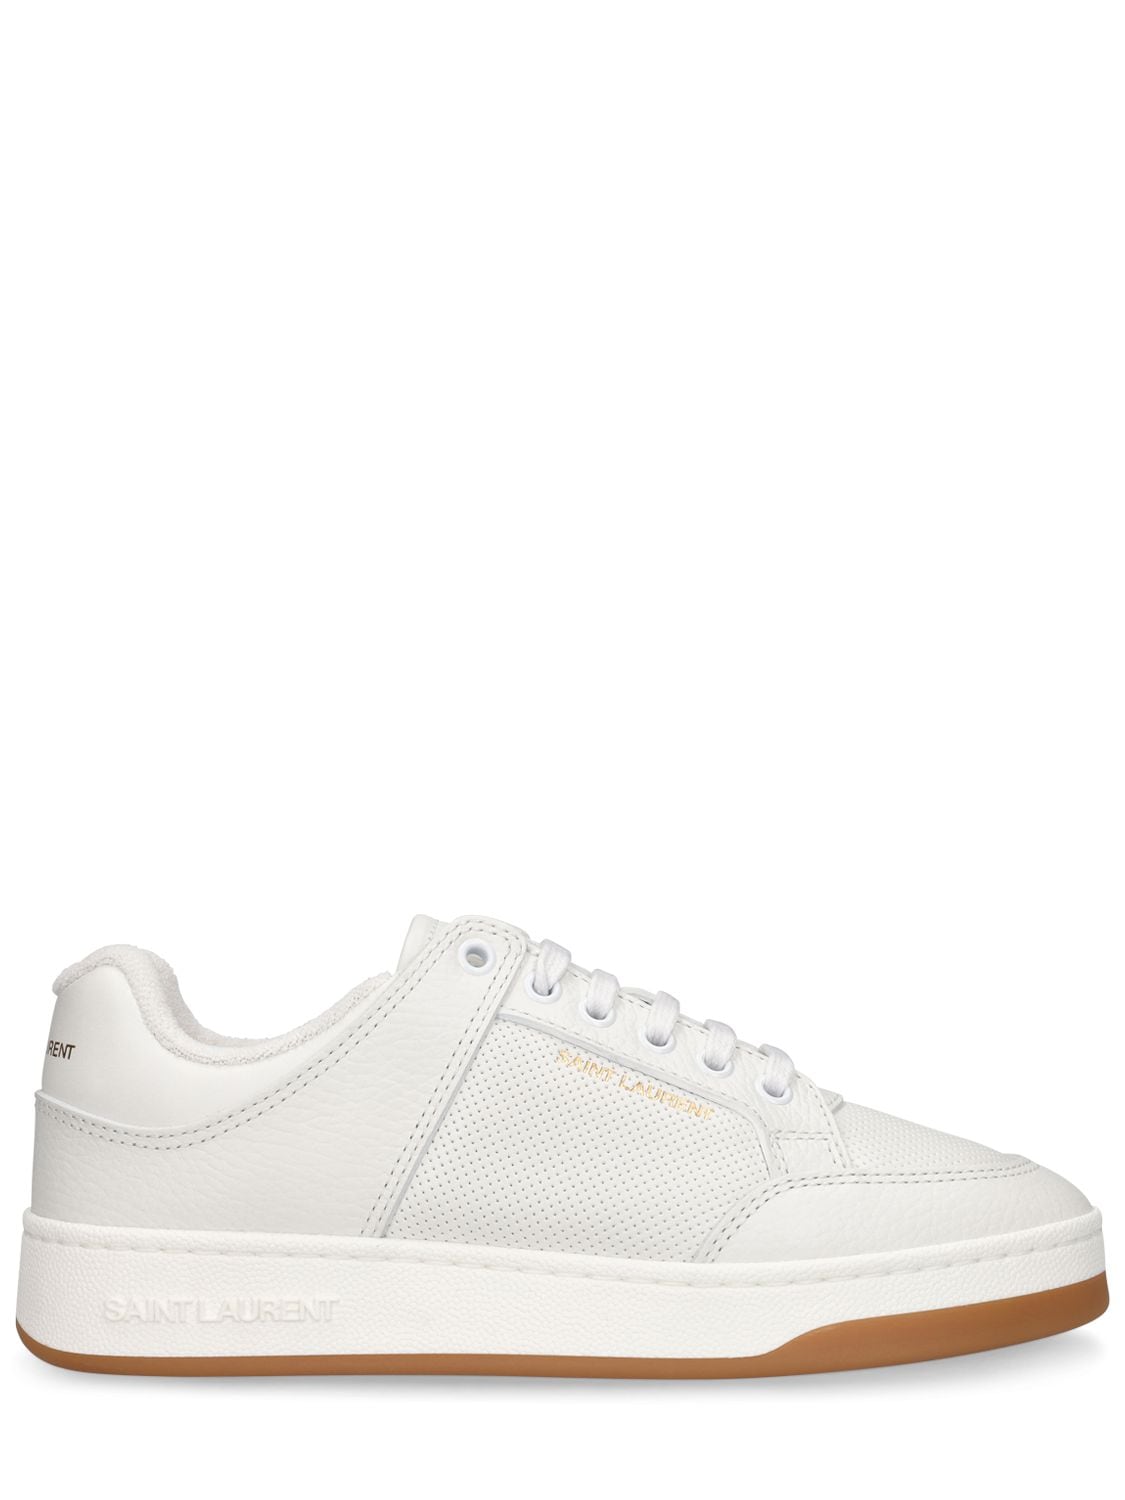 Shop Saint Laurent 20mm Sl61 Low Top Leather Sneakers In White